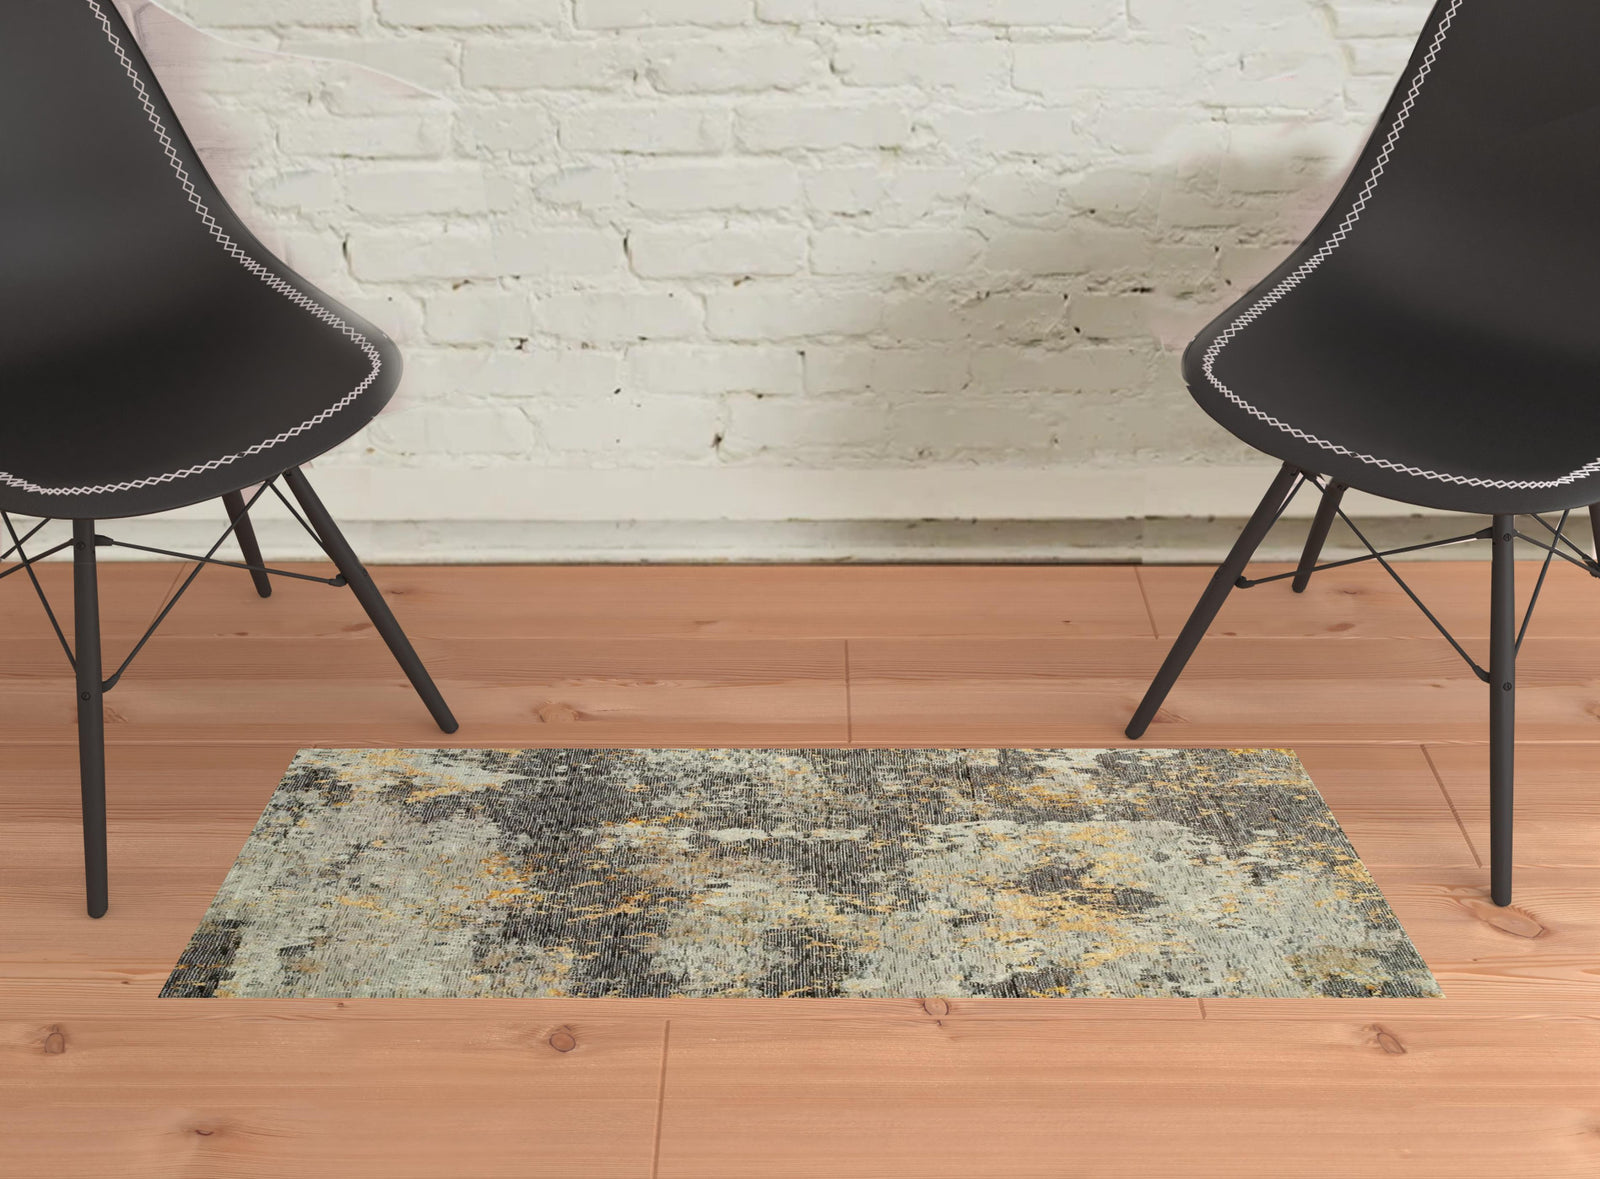 2' X 3' Grey And Gold Abstract Power Loom Stain Resistant Area Rug